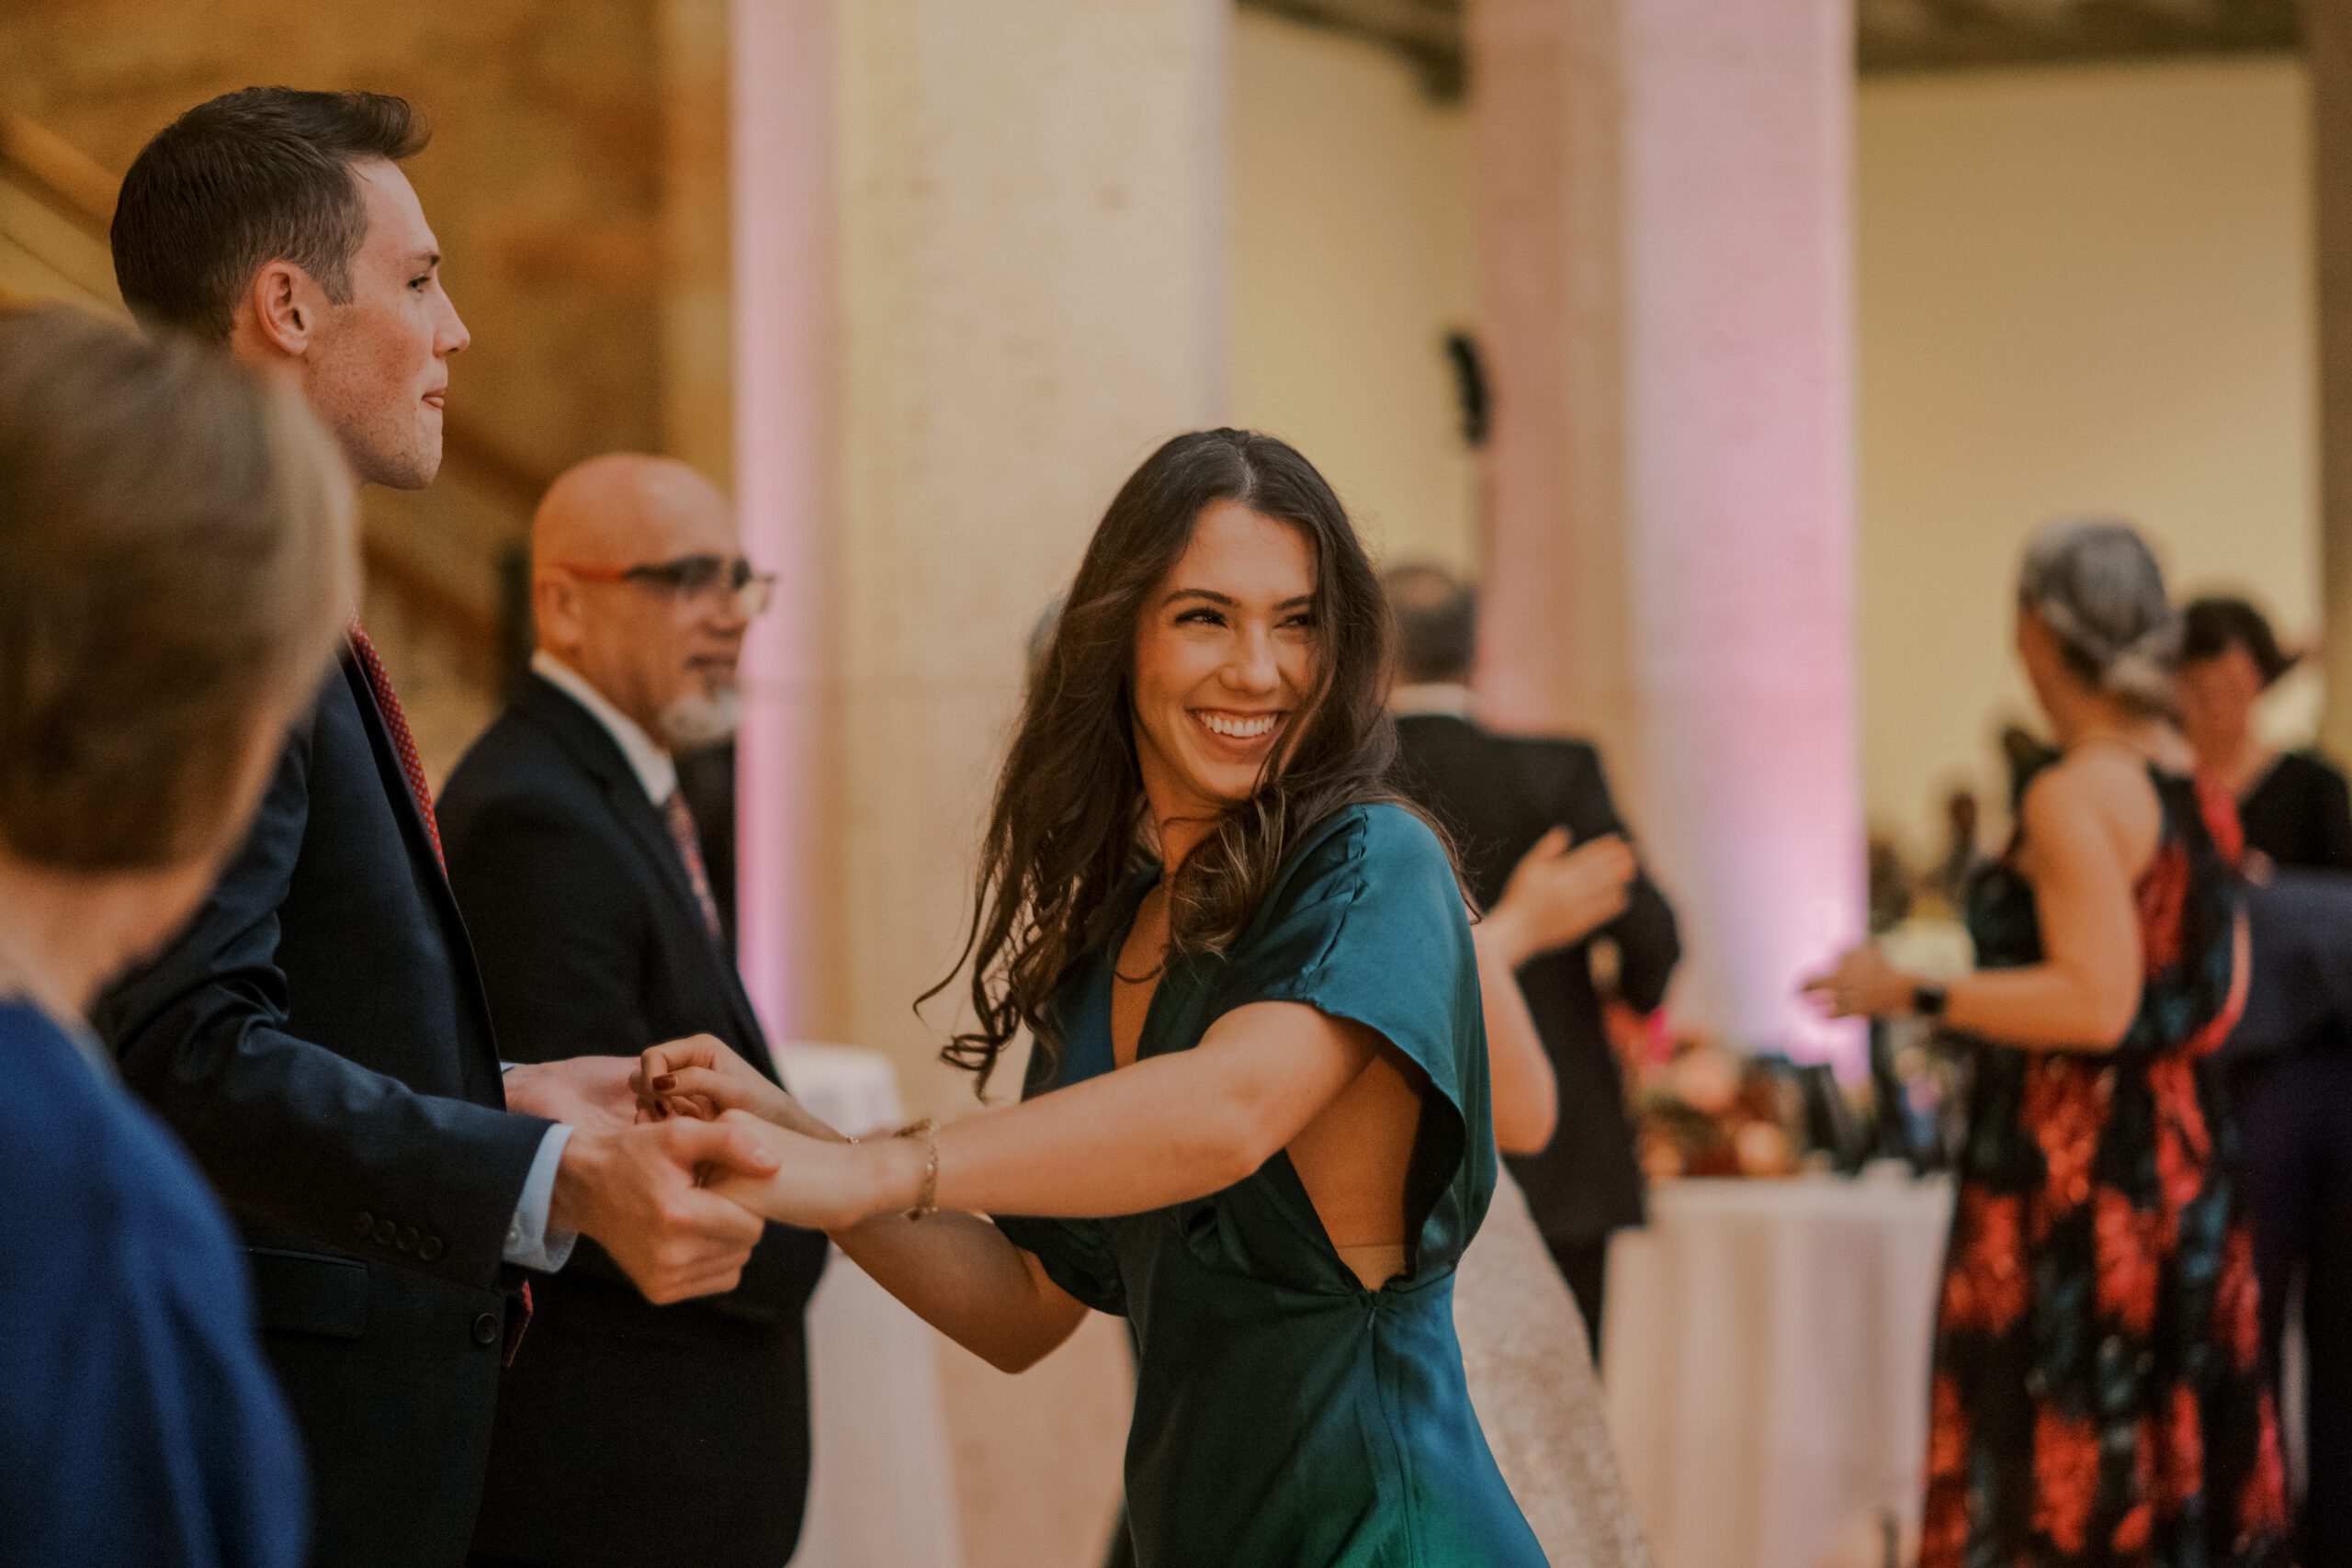 Brunette woman wearing a blue dress dancing, other guests can be seen in background dancing as well